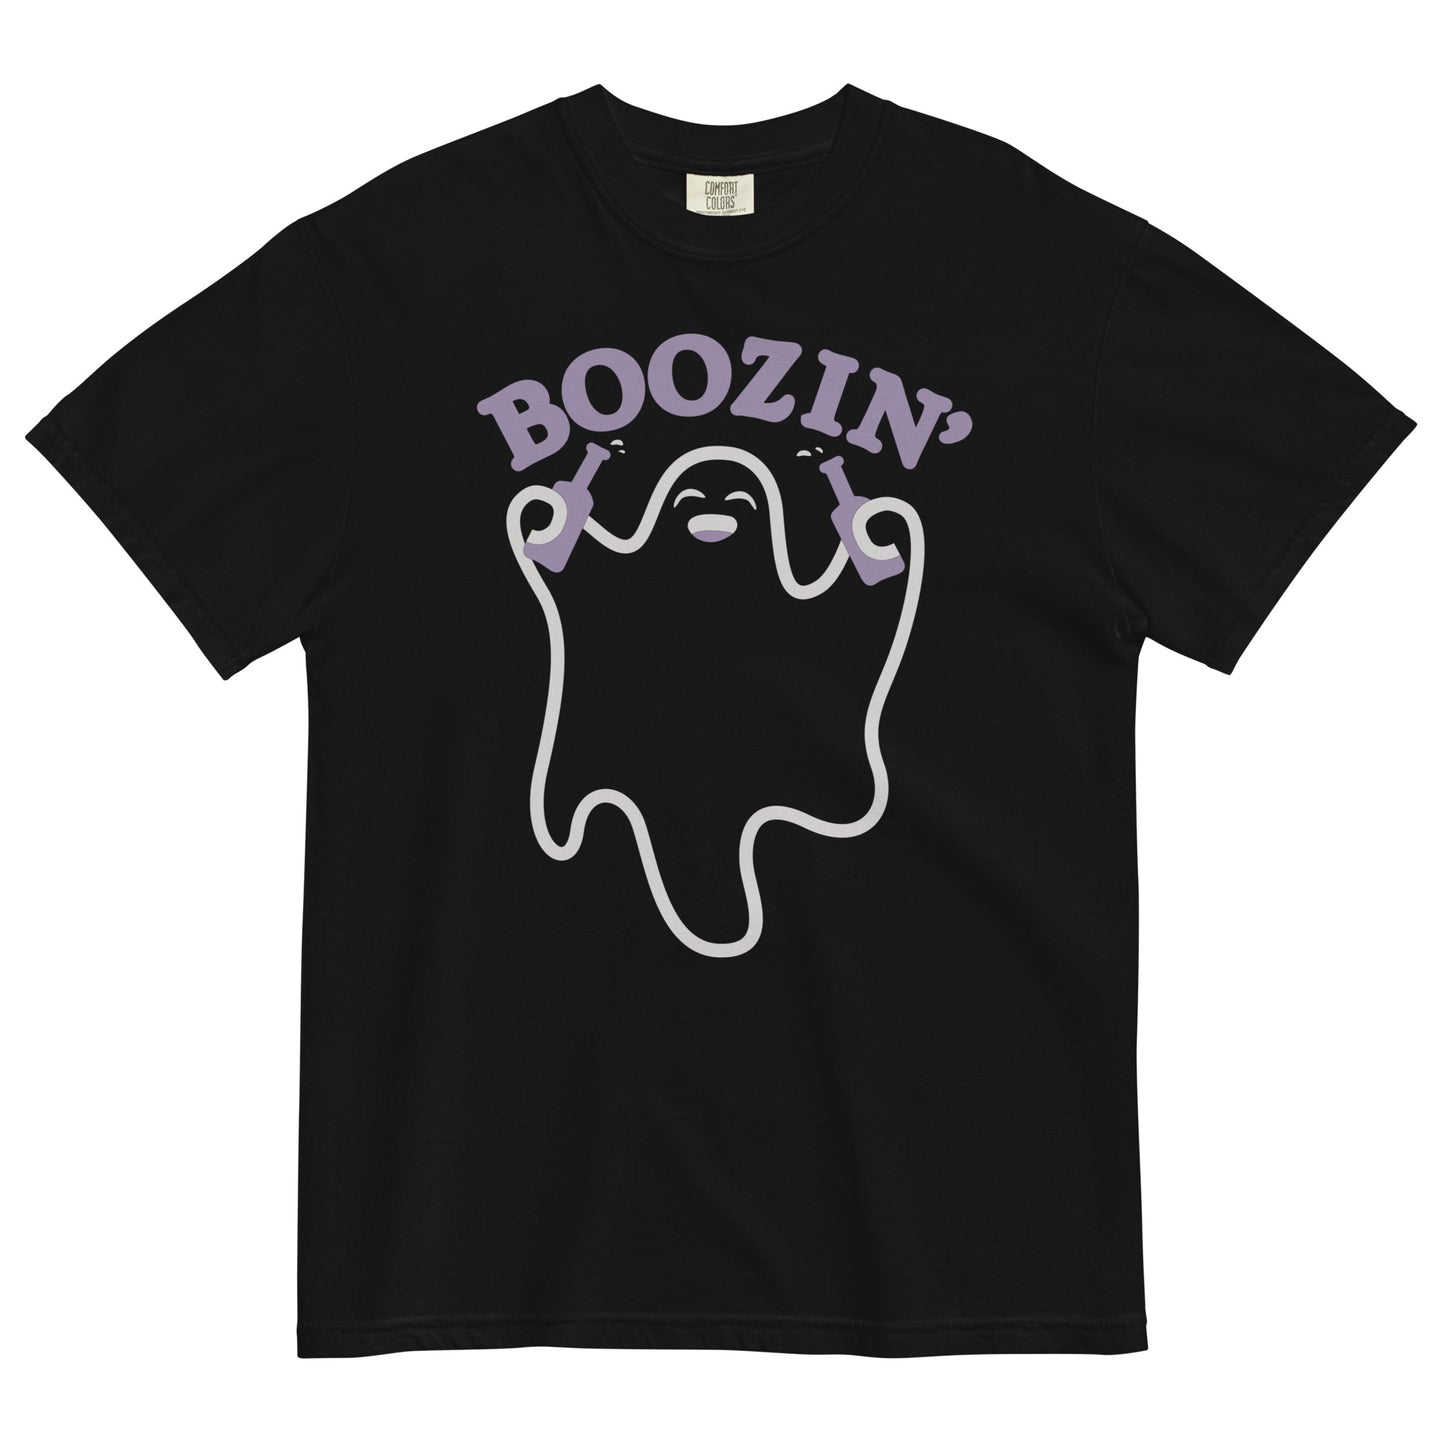 Boozin' Men's Relaxed Fit Tee